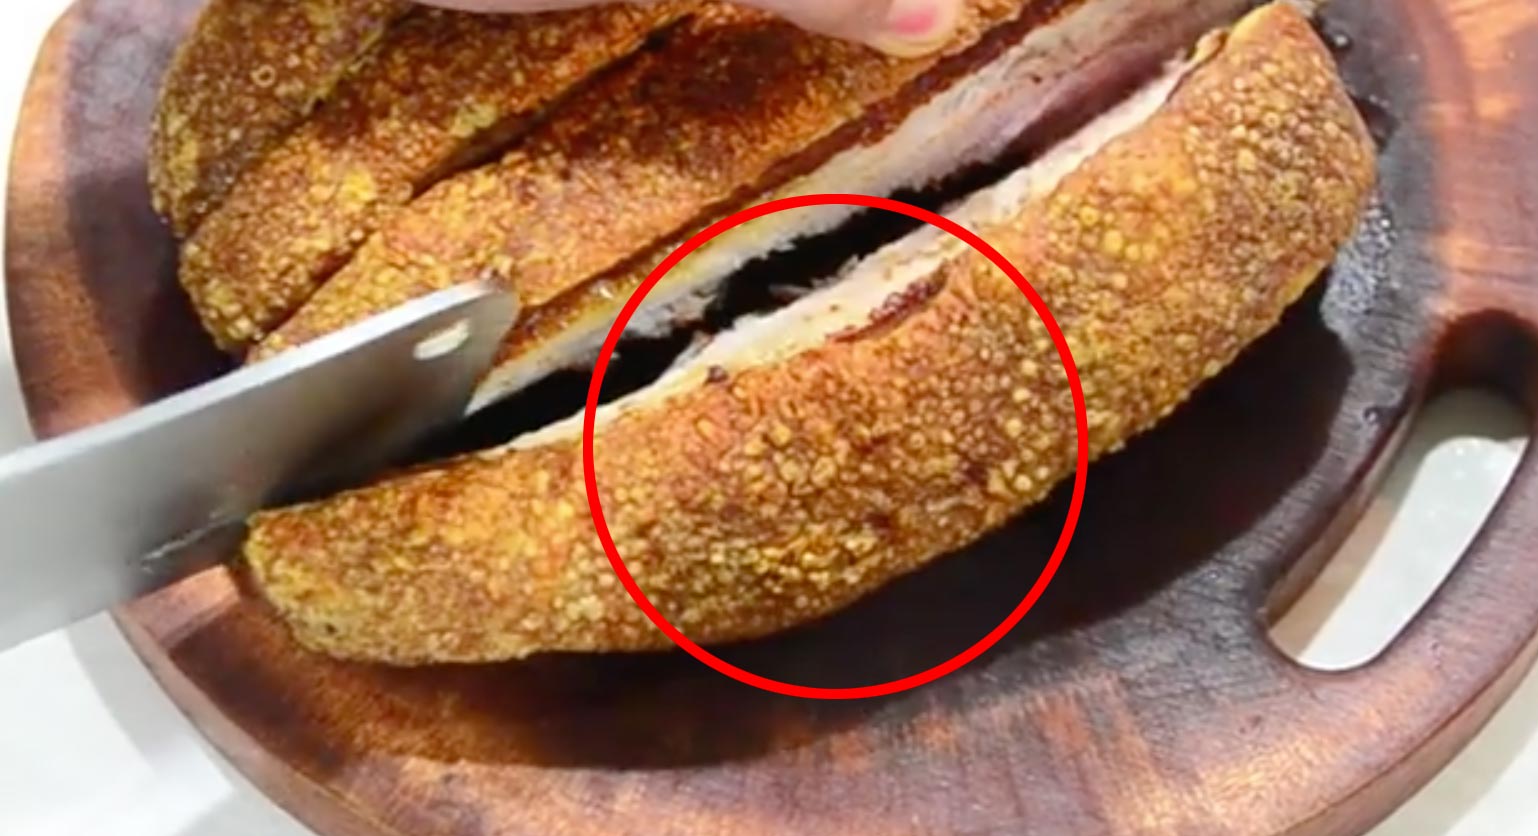 WATCH: You Won’t Believe How Crispy This Is Until You Hear It.